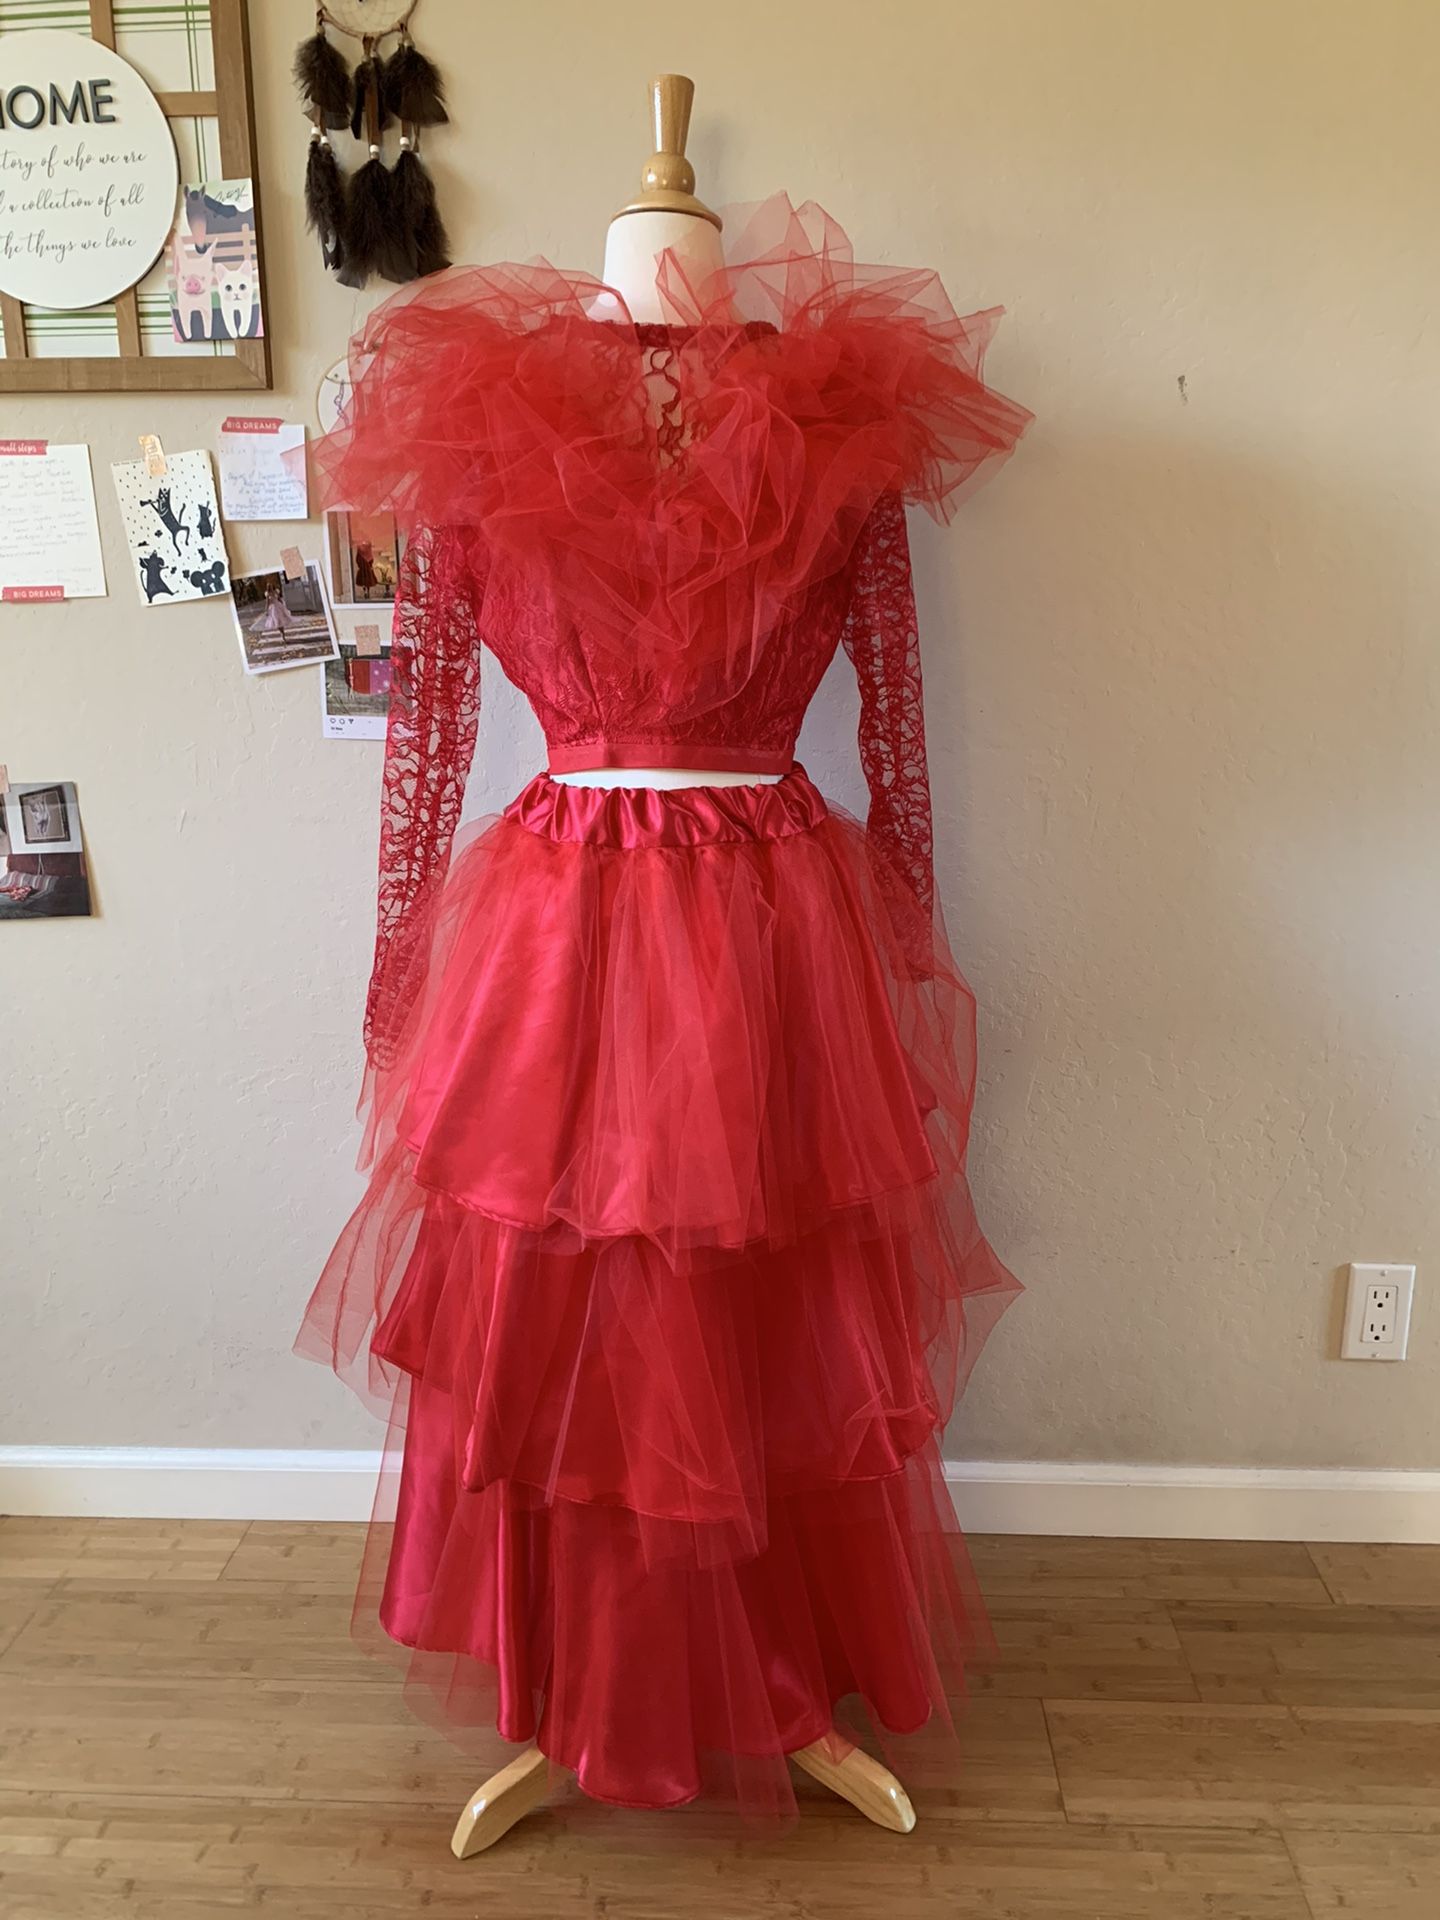 Hand Crafted Red Dress Recreation Of Lydia’s Dress